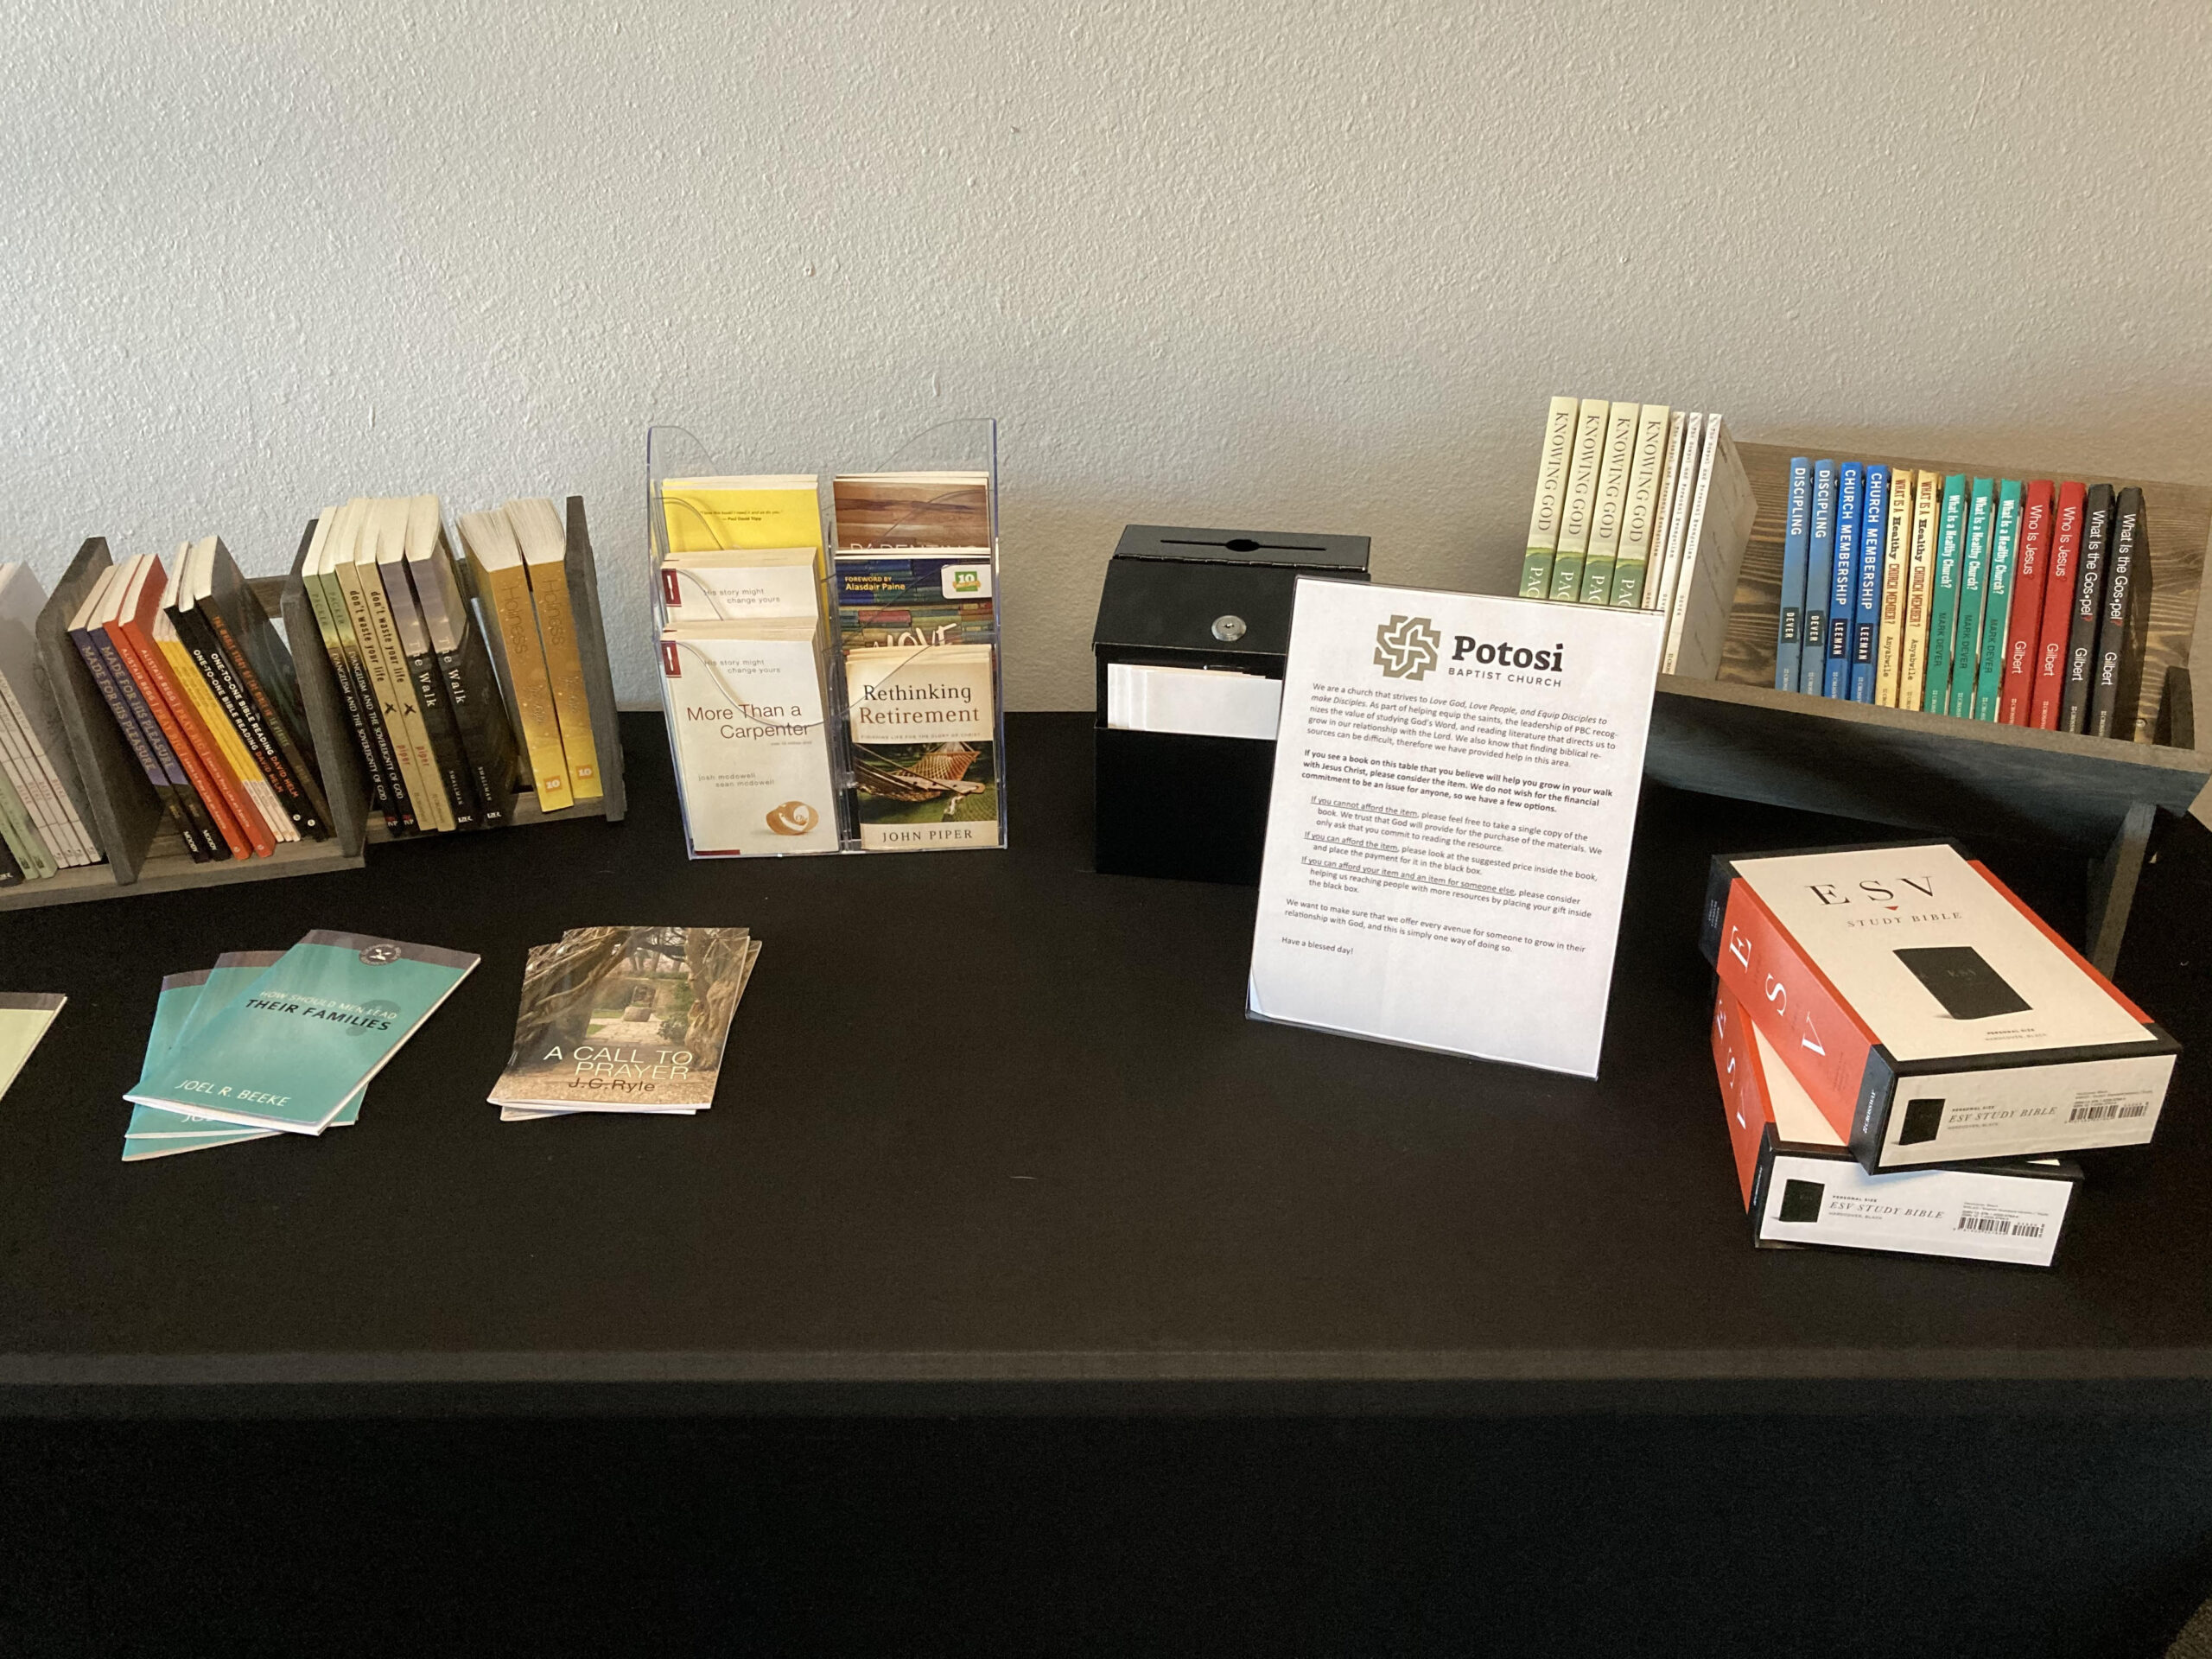 Informational books on table